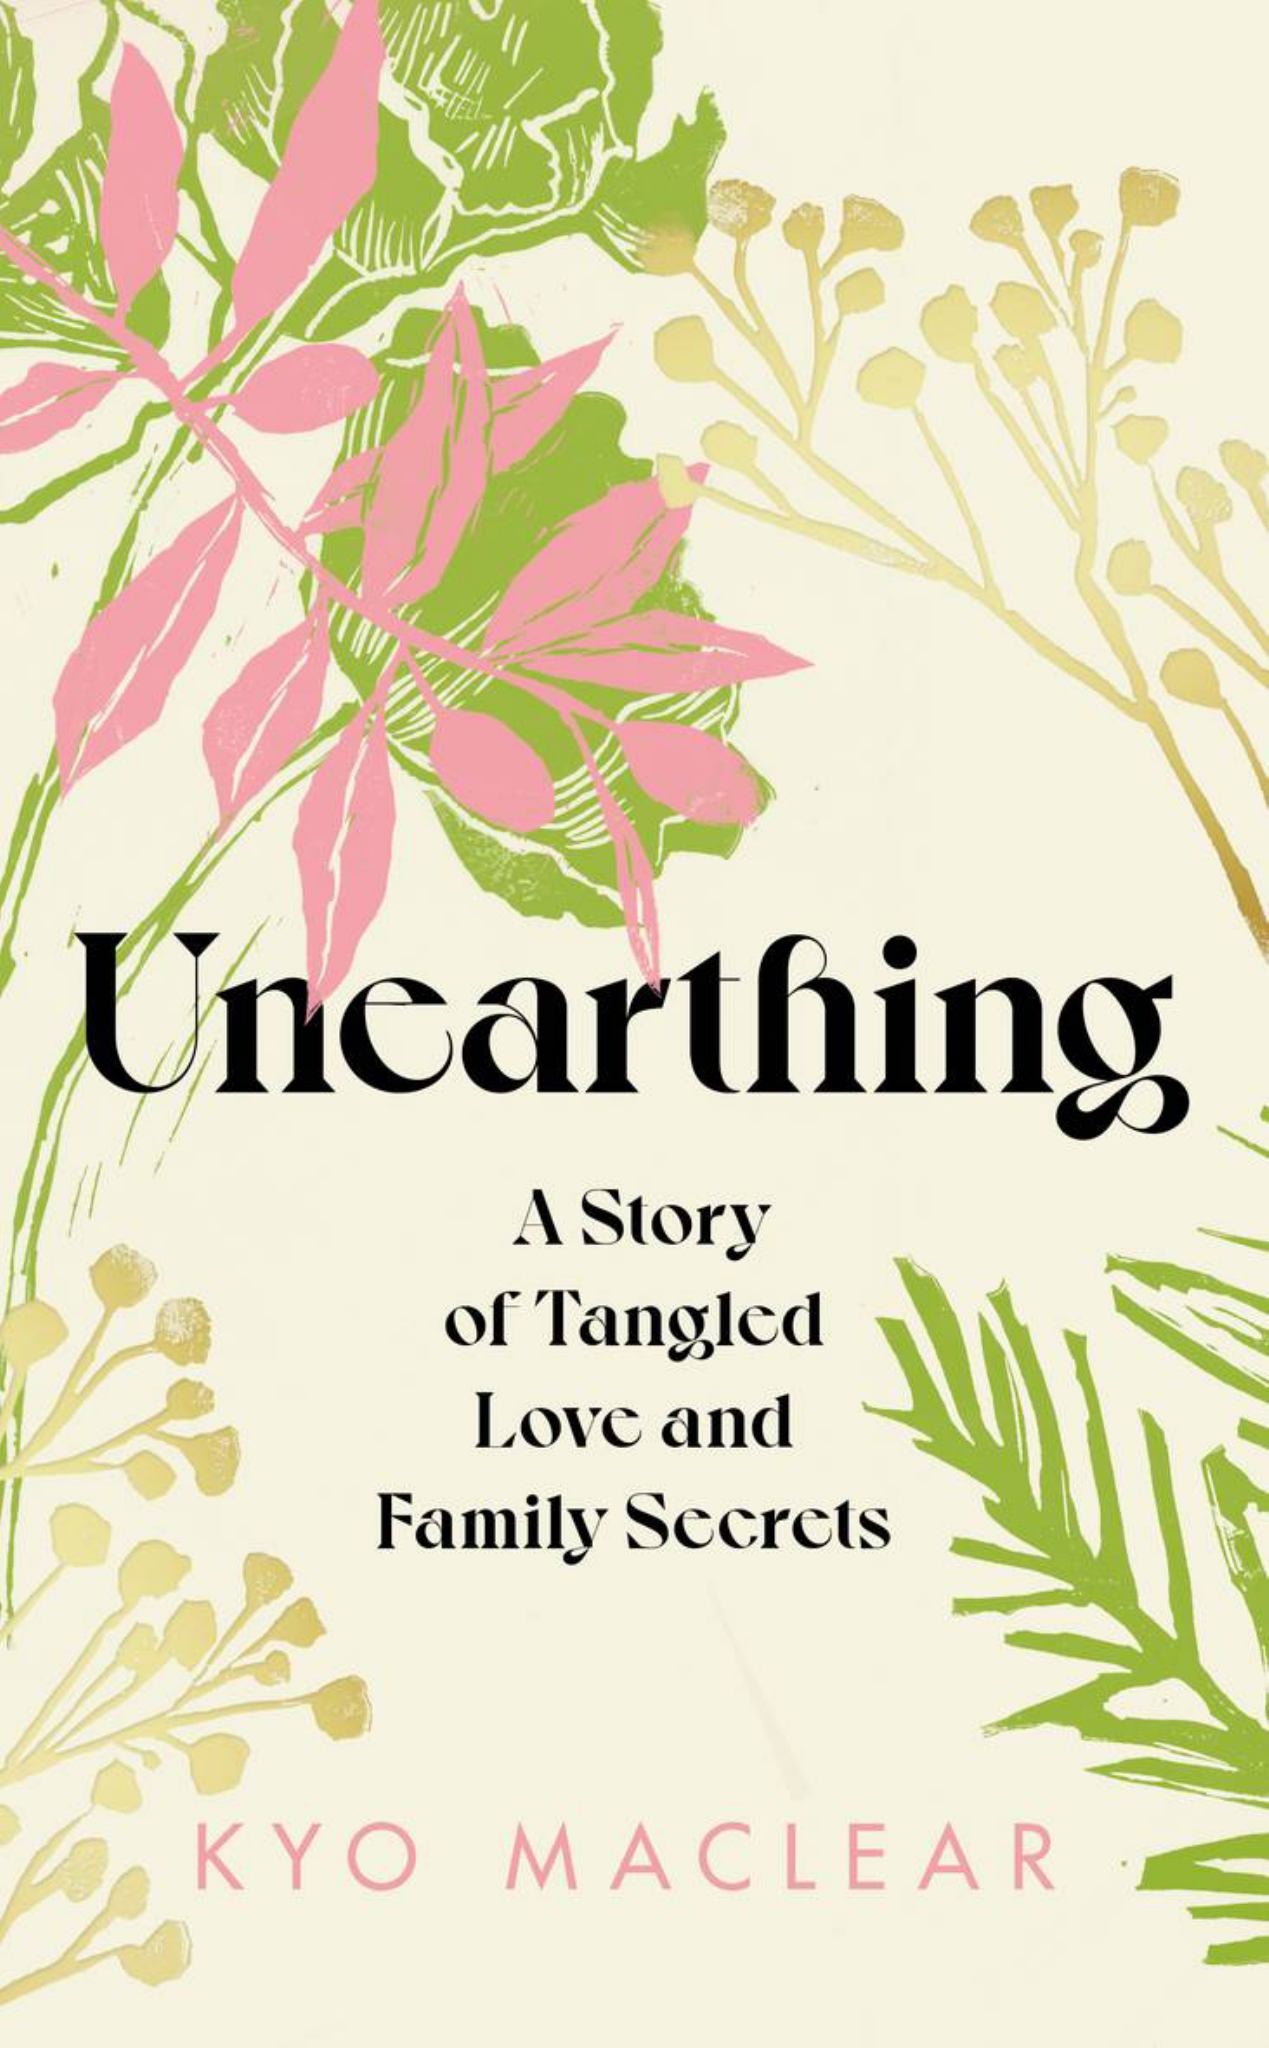 Unearthing A Story Of Tangled Love & Family Secrets